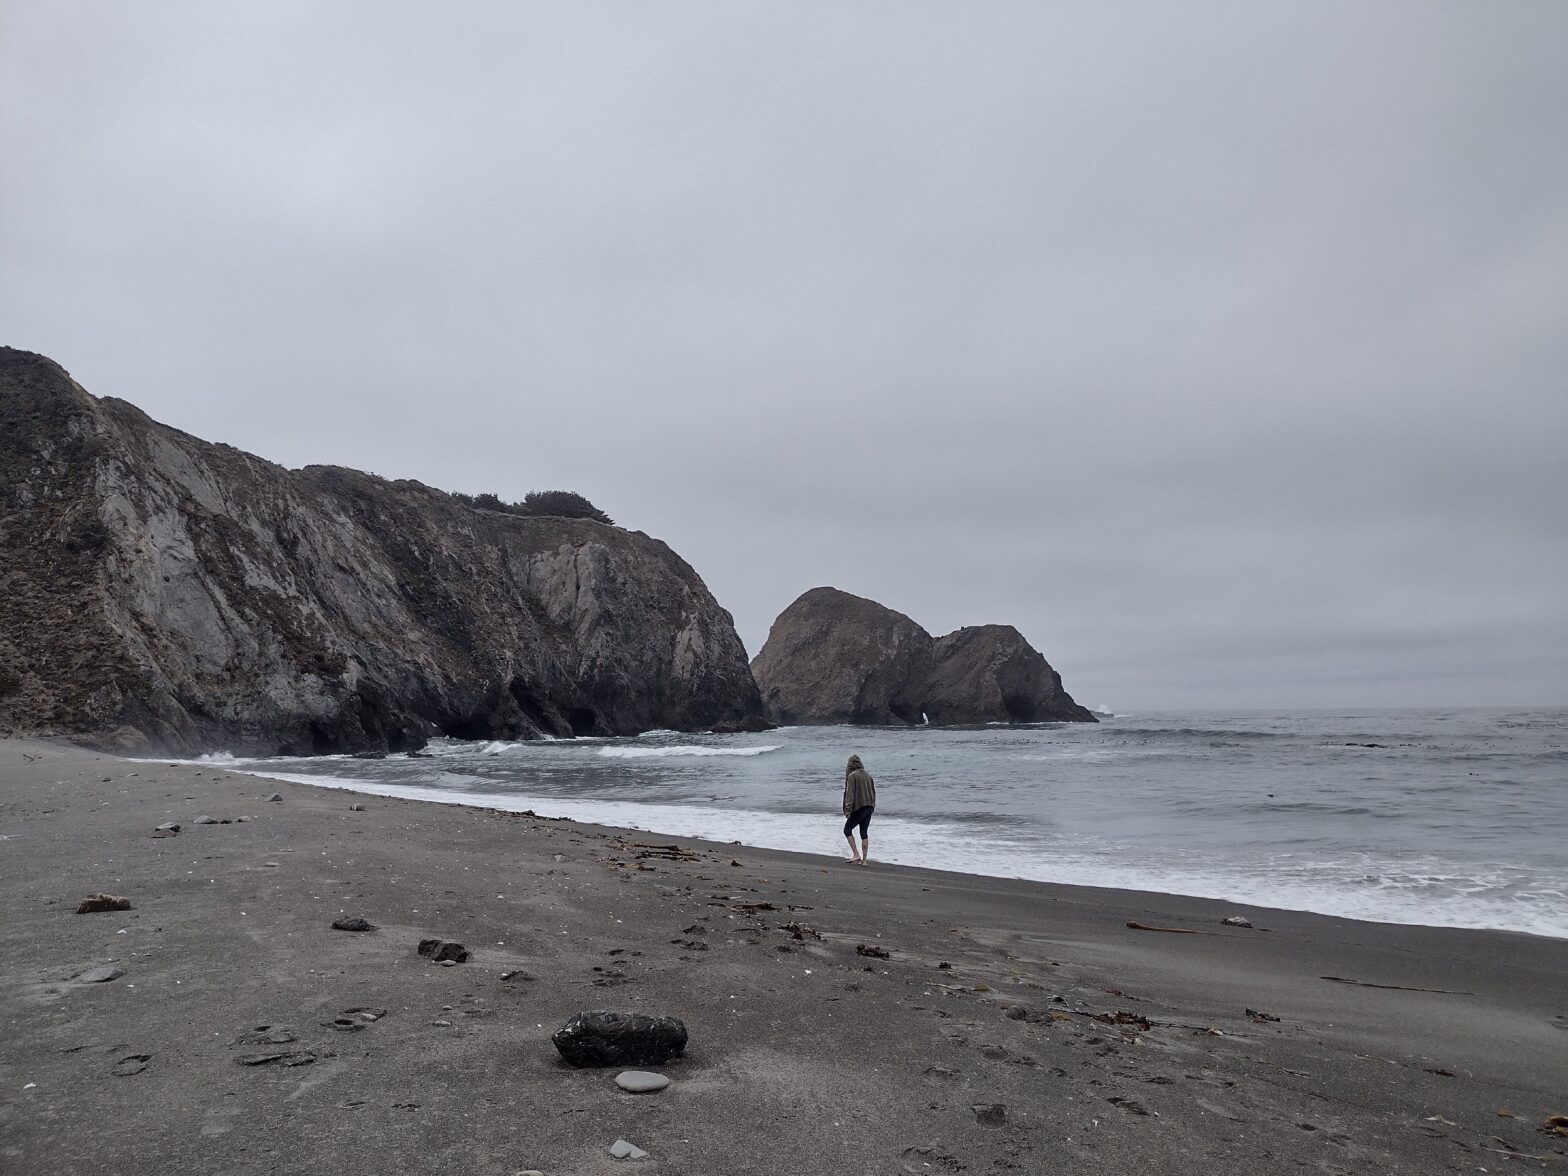 Greenwood beach on a cloudy day. One person can be seen walking along where the waves break